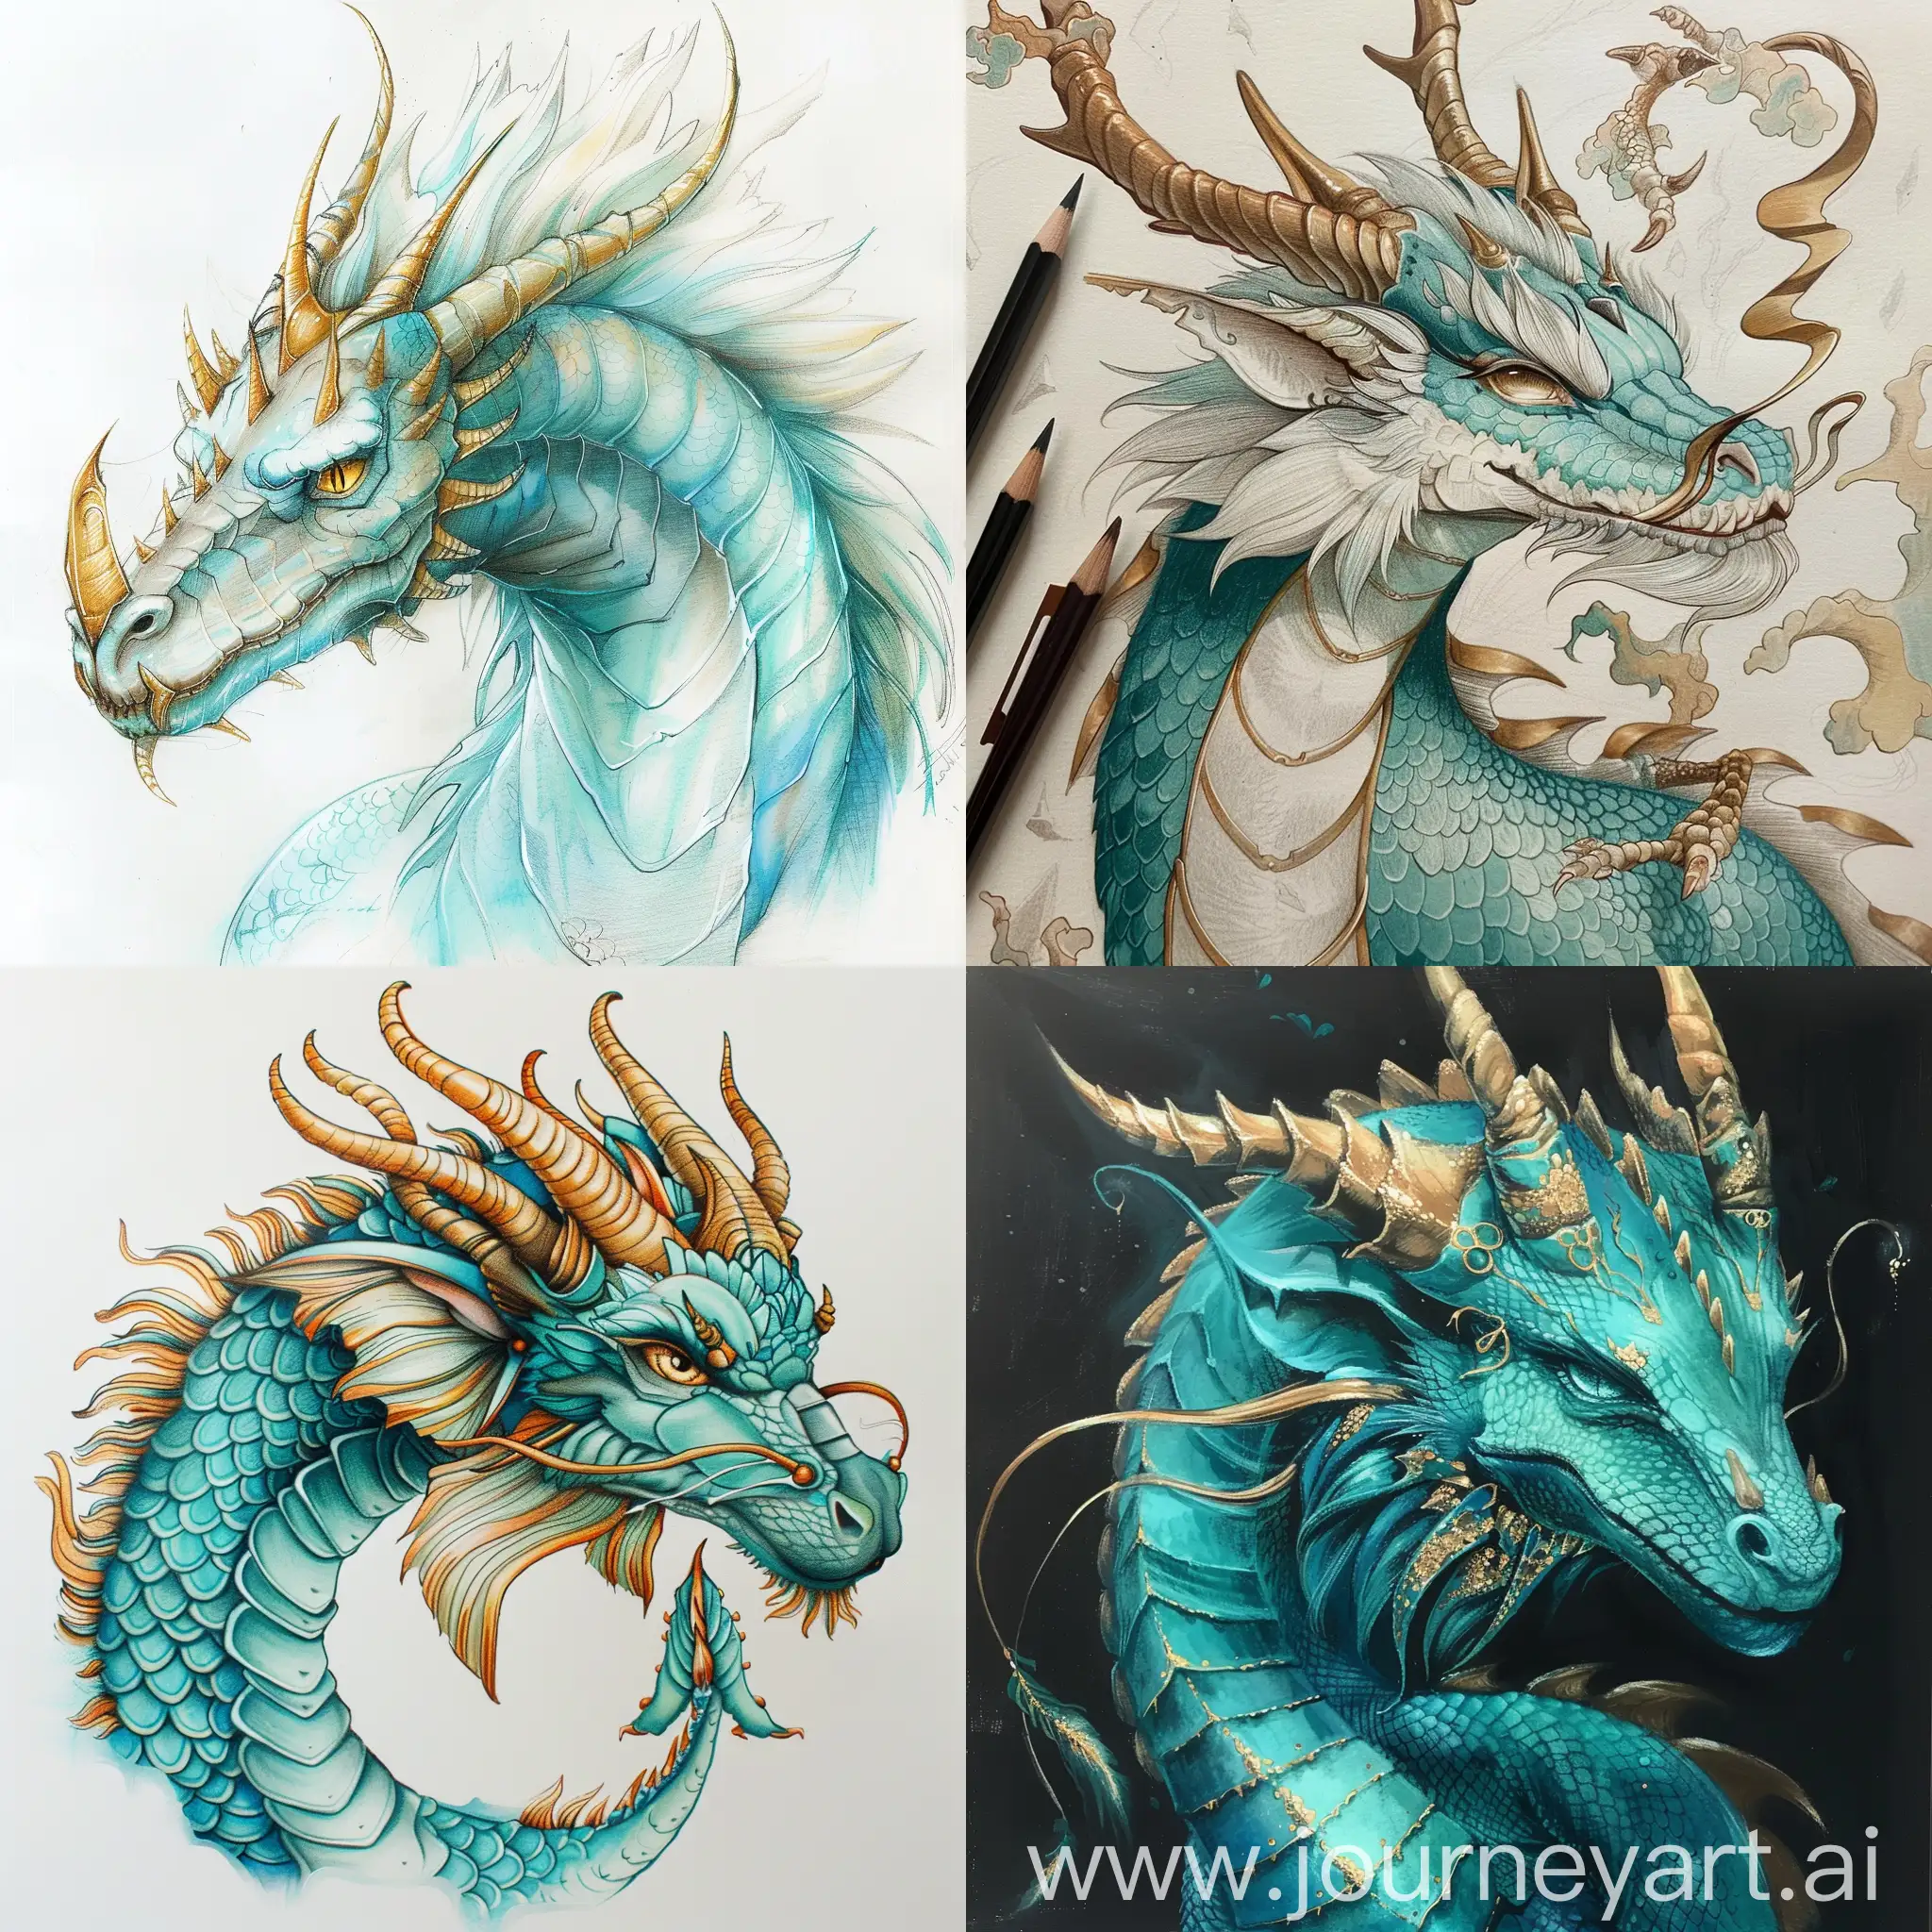 Turquoise-Dragon-with-Gold-Horns-Fantasy-Art